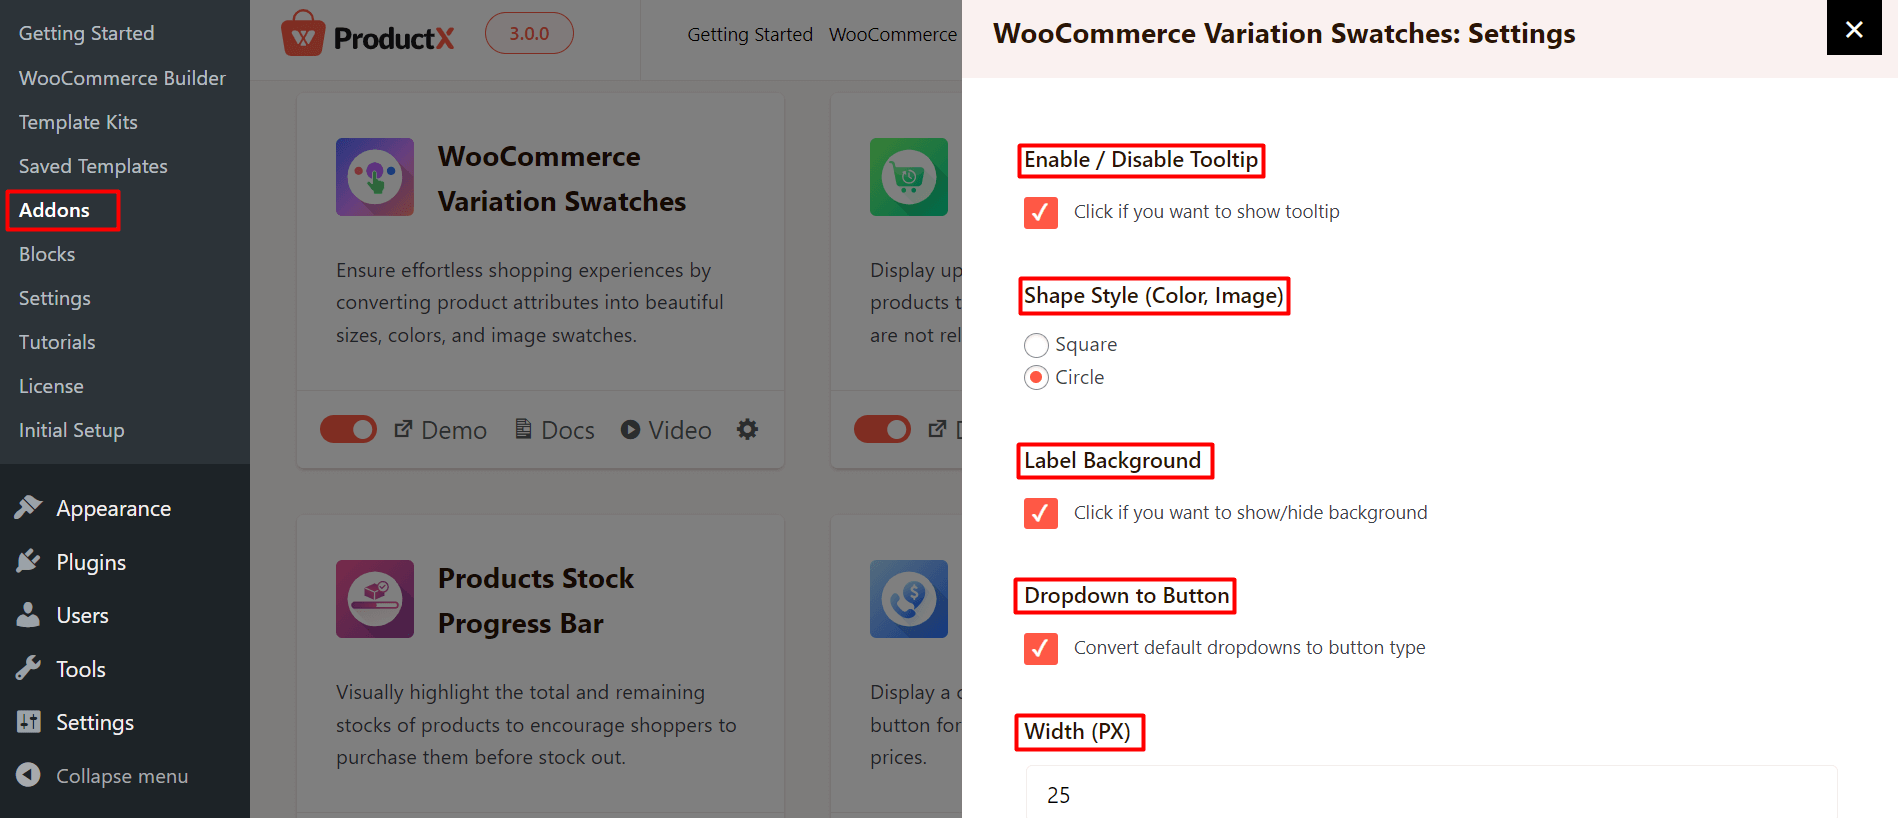 WooCommerce Variation Swatches - Settings (1)